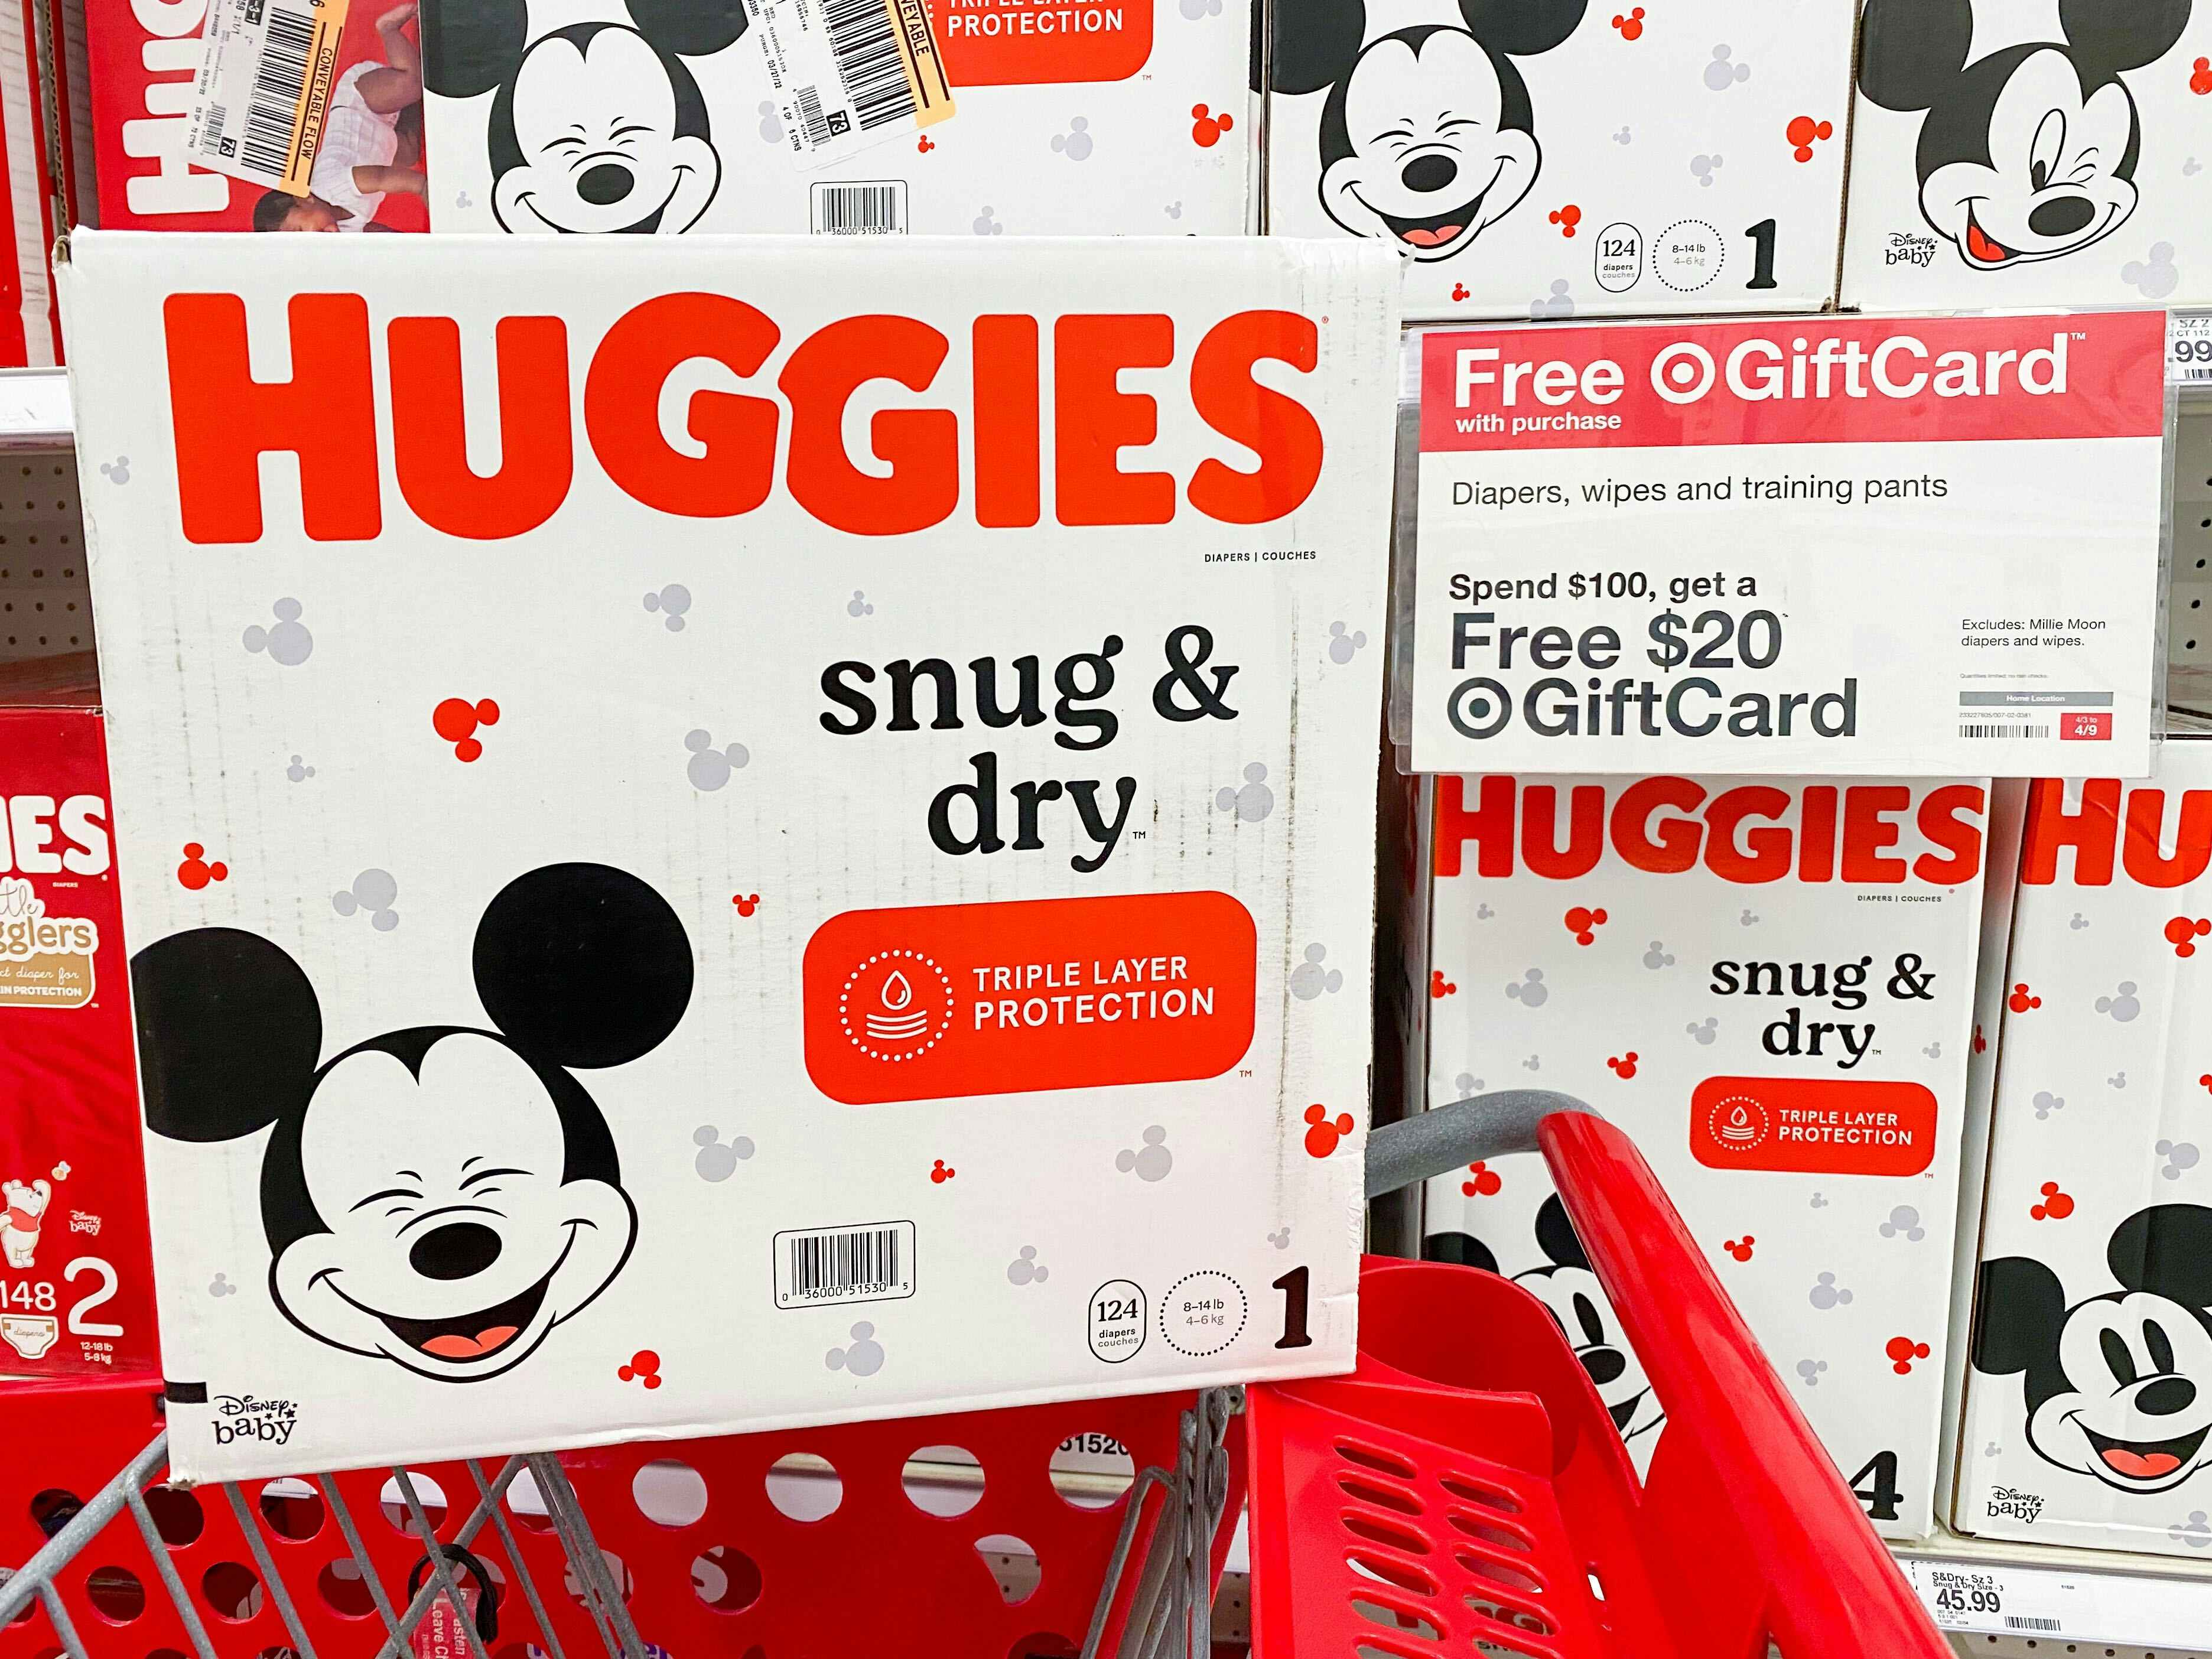 A box of Huggies Snug & Dry diapers sitting on a Target shopping cart in front of a sign advertising a Free $20 Target gift card when you...